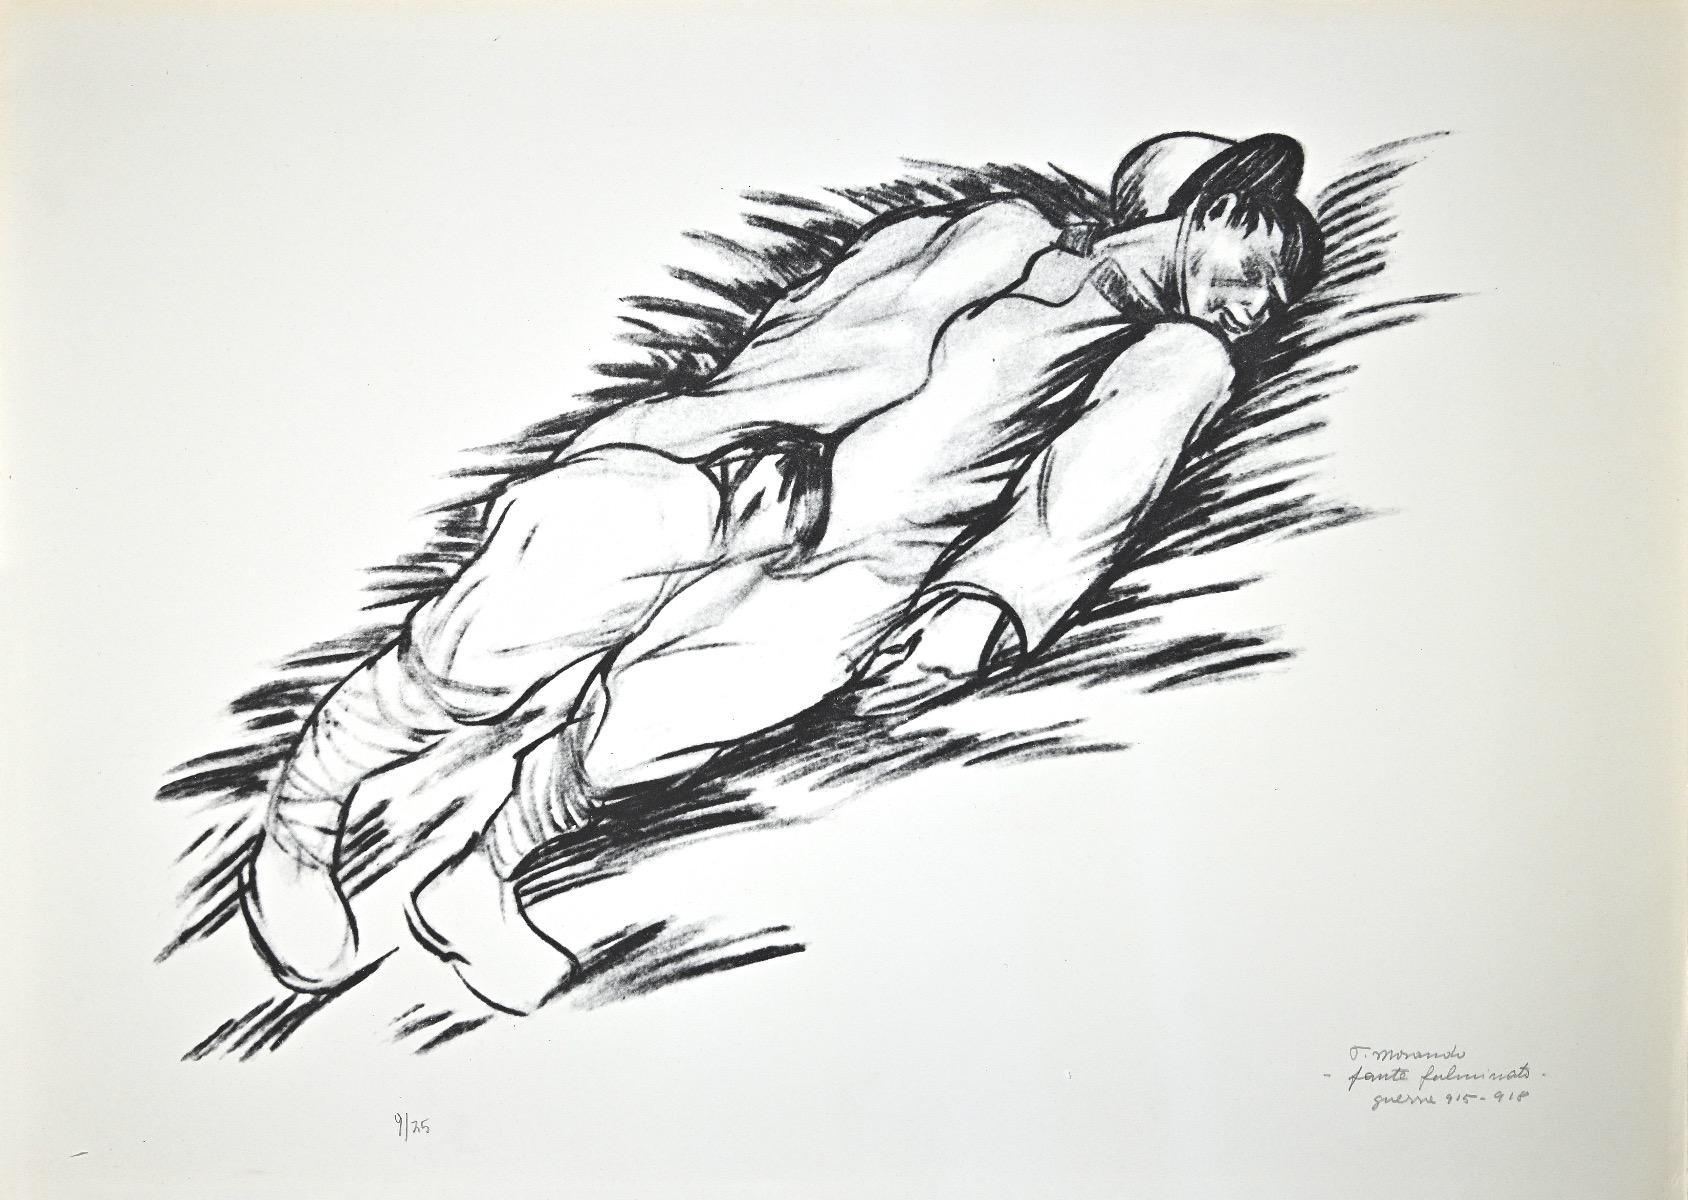 Infantryman electrocuted is an original lithograph realized by Italian artist Pietro Morando (Alessandria 1889- 1980).

Hand-signed on the lower right in pencil, titled, referring to the war "1915-1918"

Numbered on the lower left, the edition of